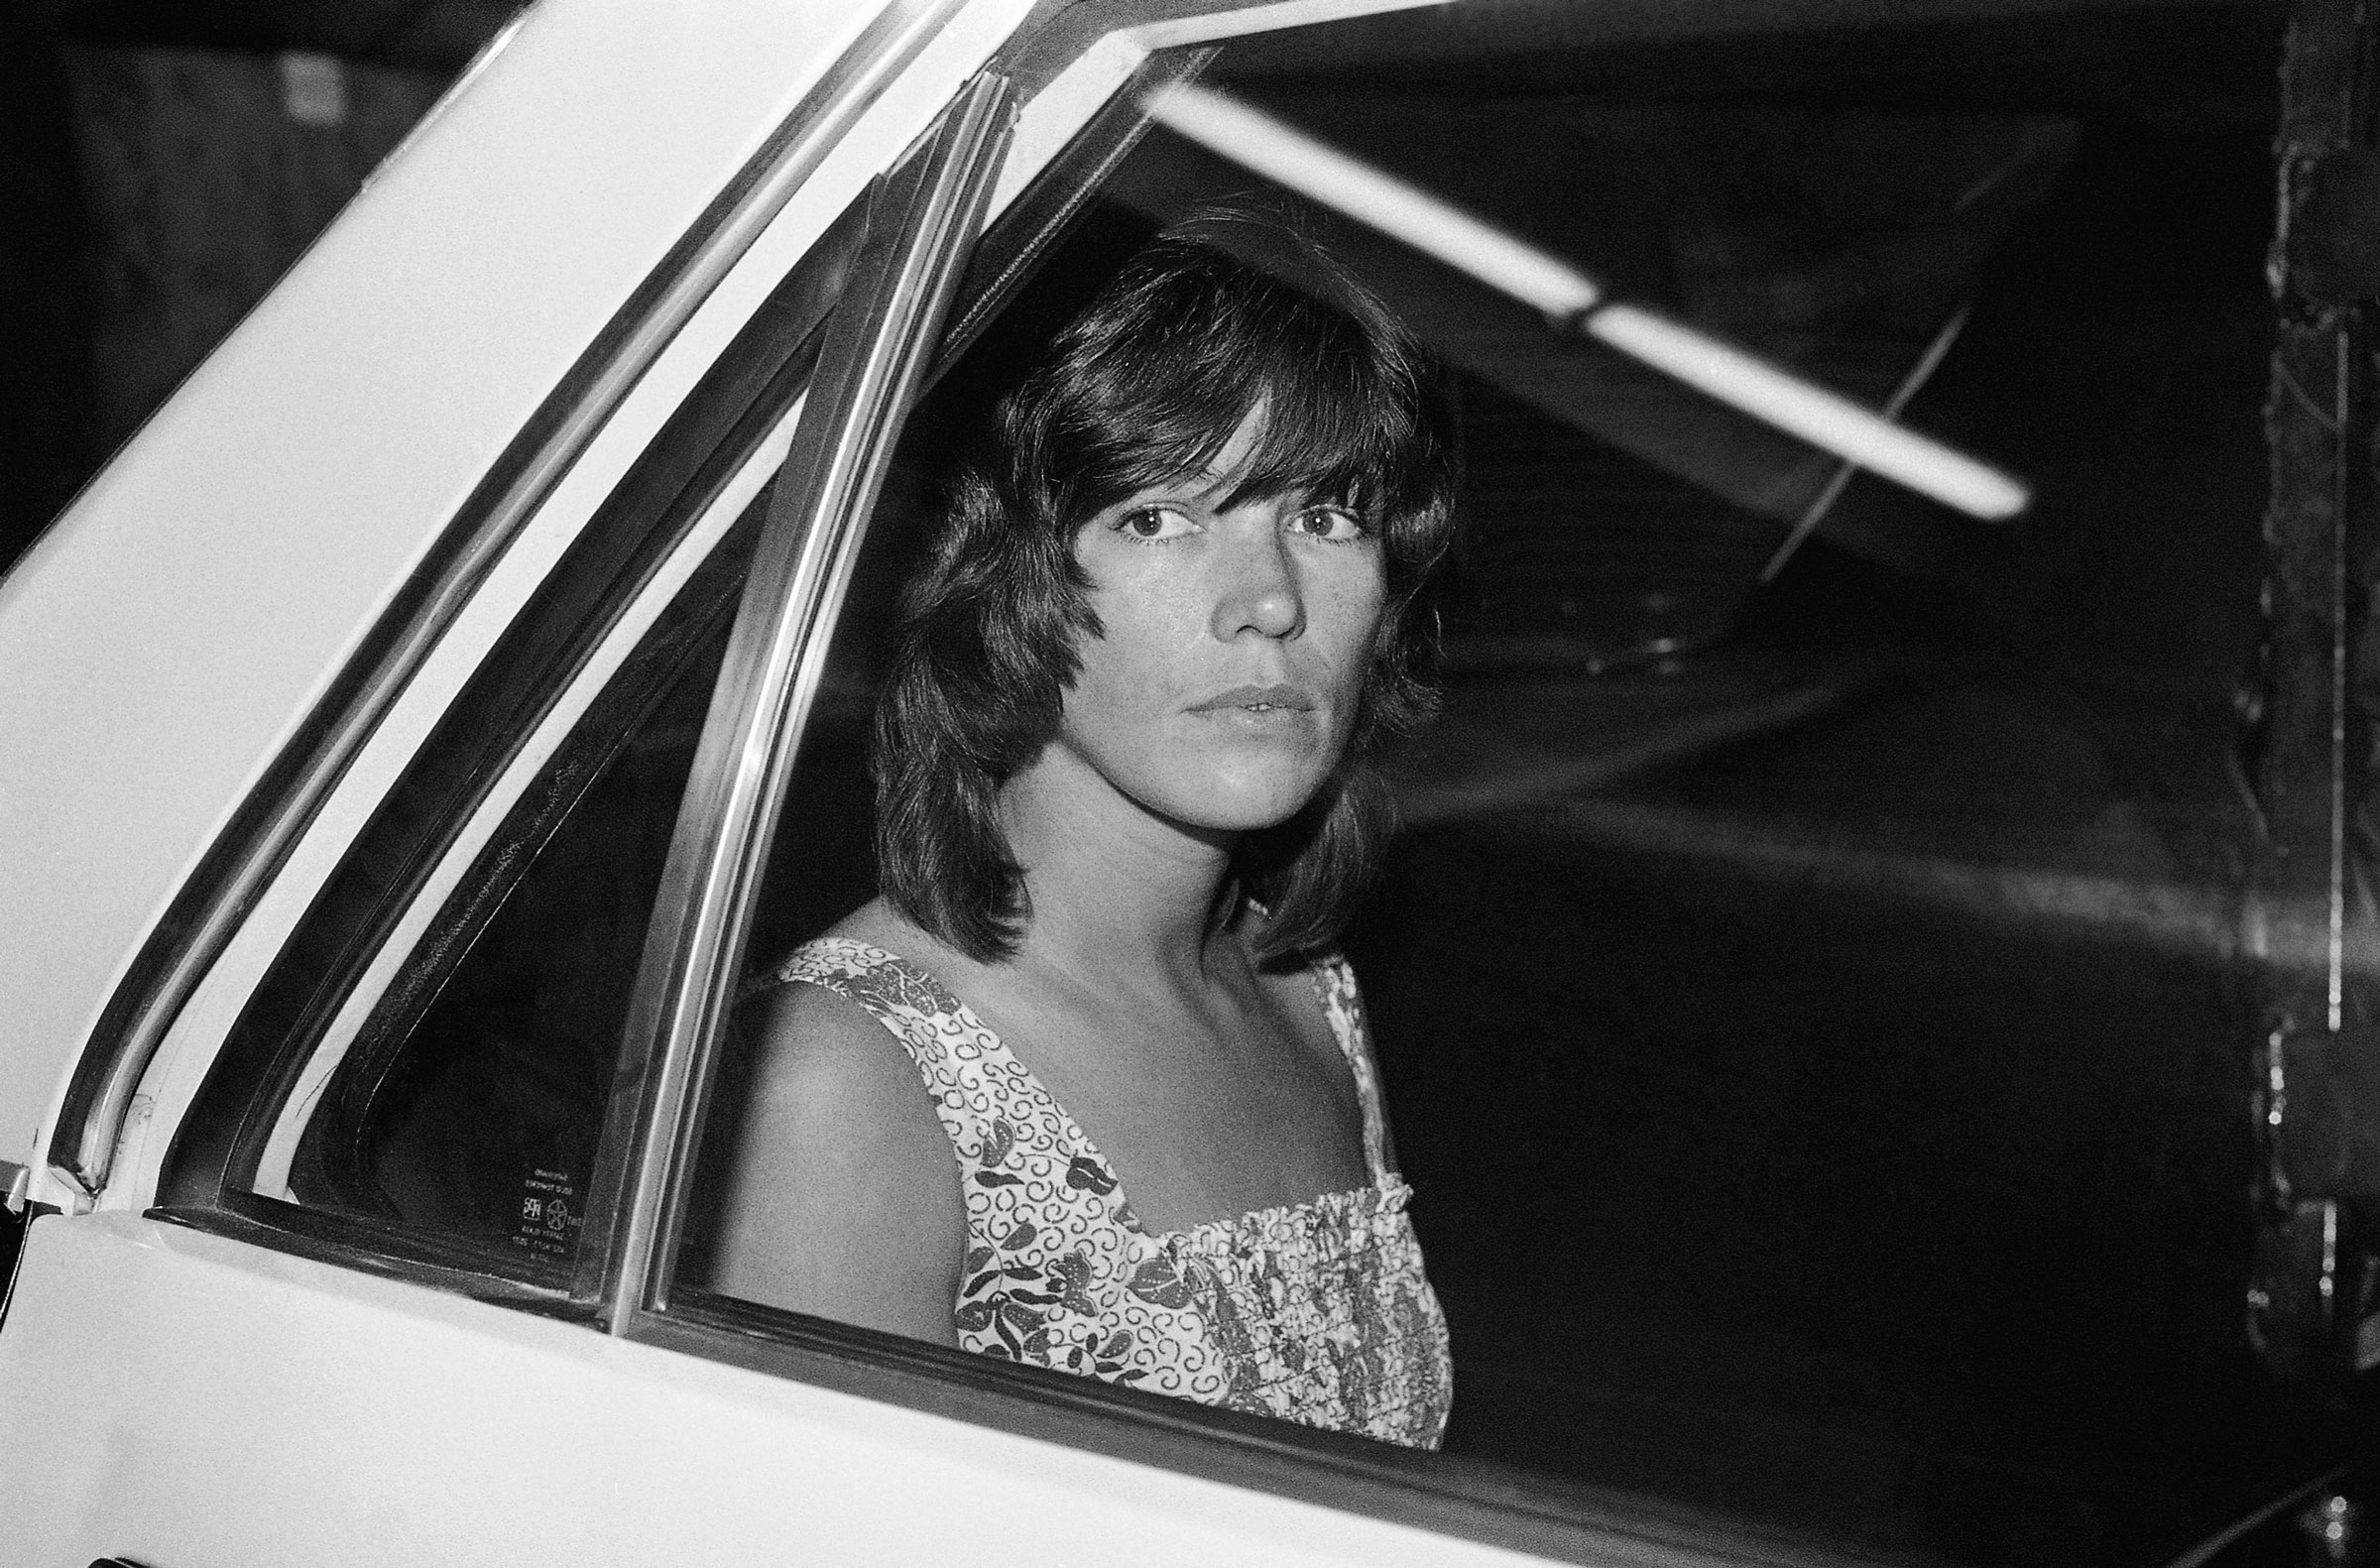 Leslie Van Houten, a former Charles Manson follower, looks from the window of a sheriff’s van as she left the county court house following her court appearance for sentencing in 1978